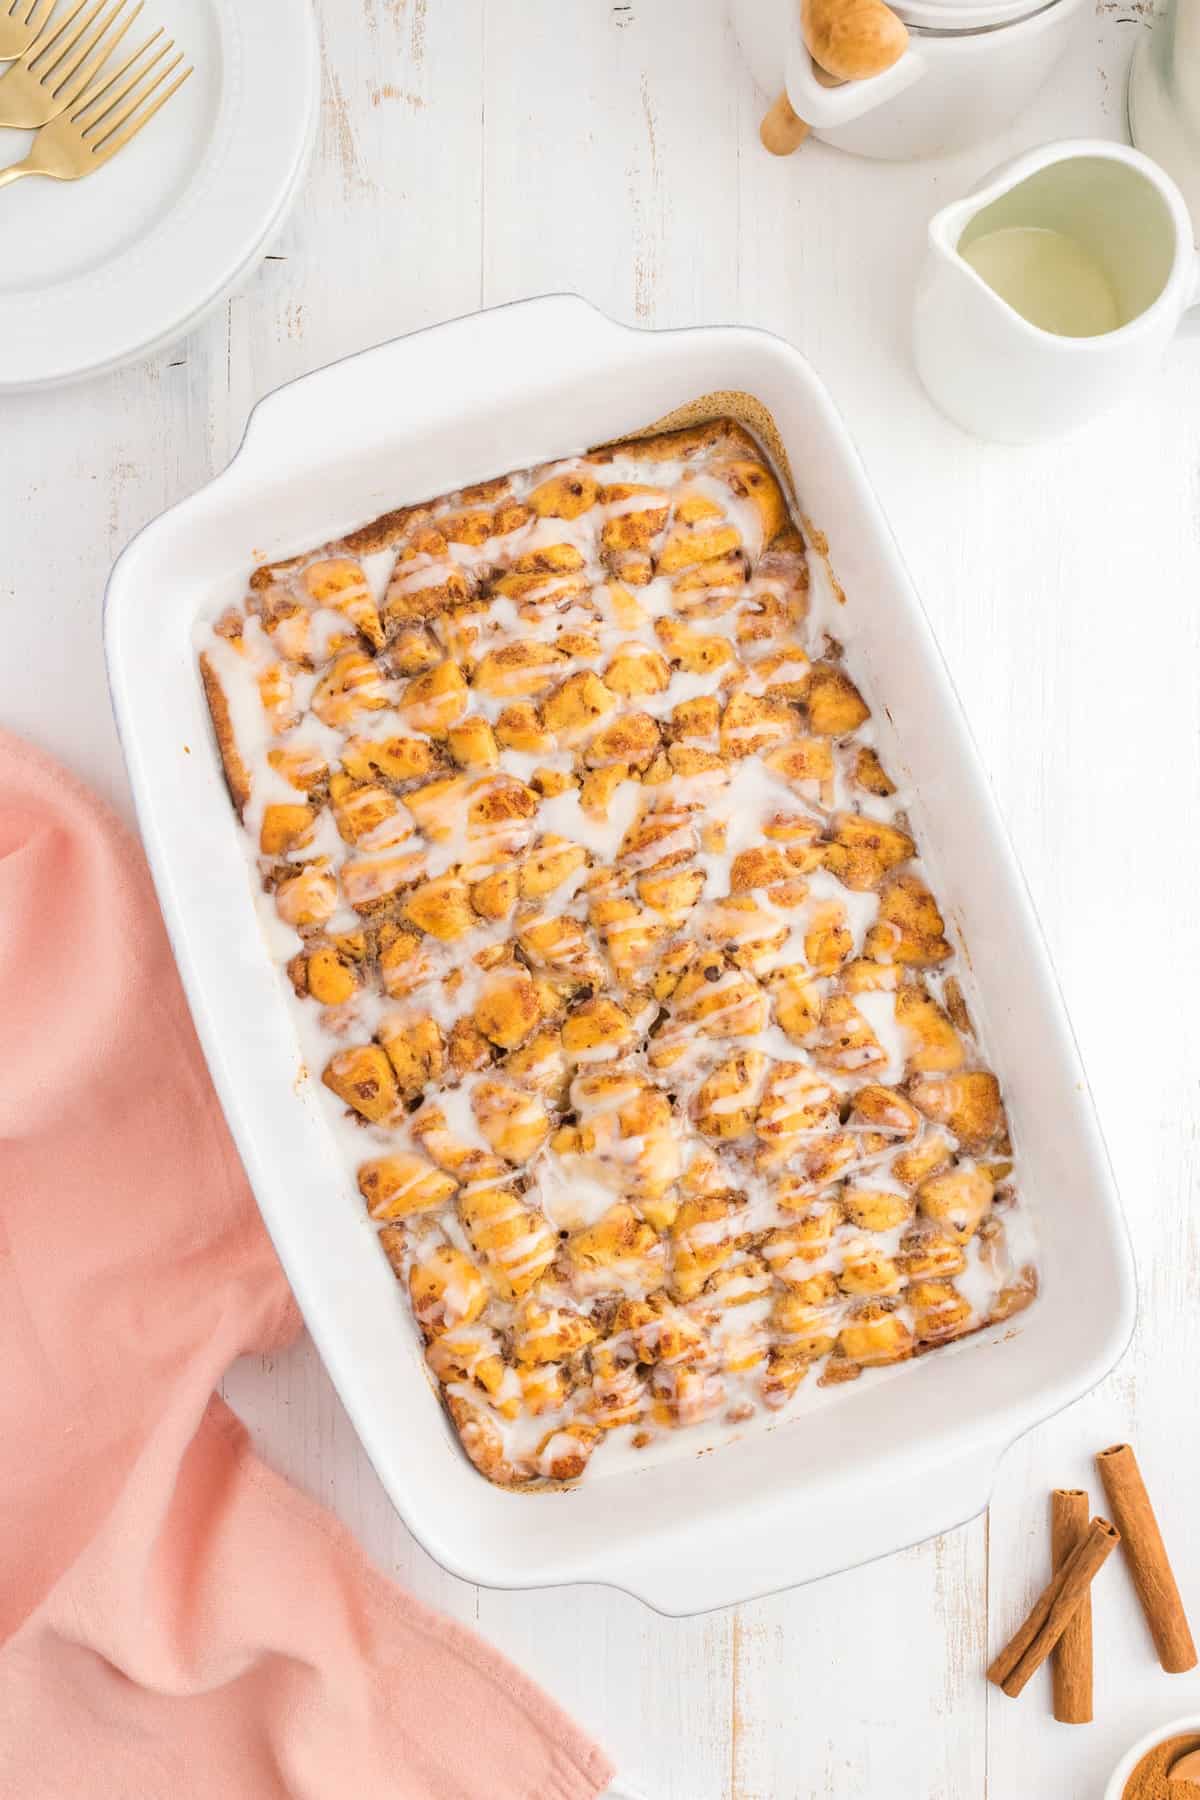 Drizzled frosting over Cinnamon Roll Casserole recipe in baking dish